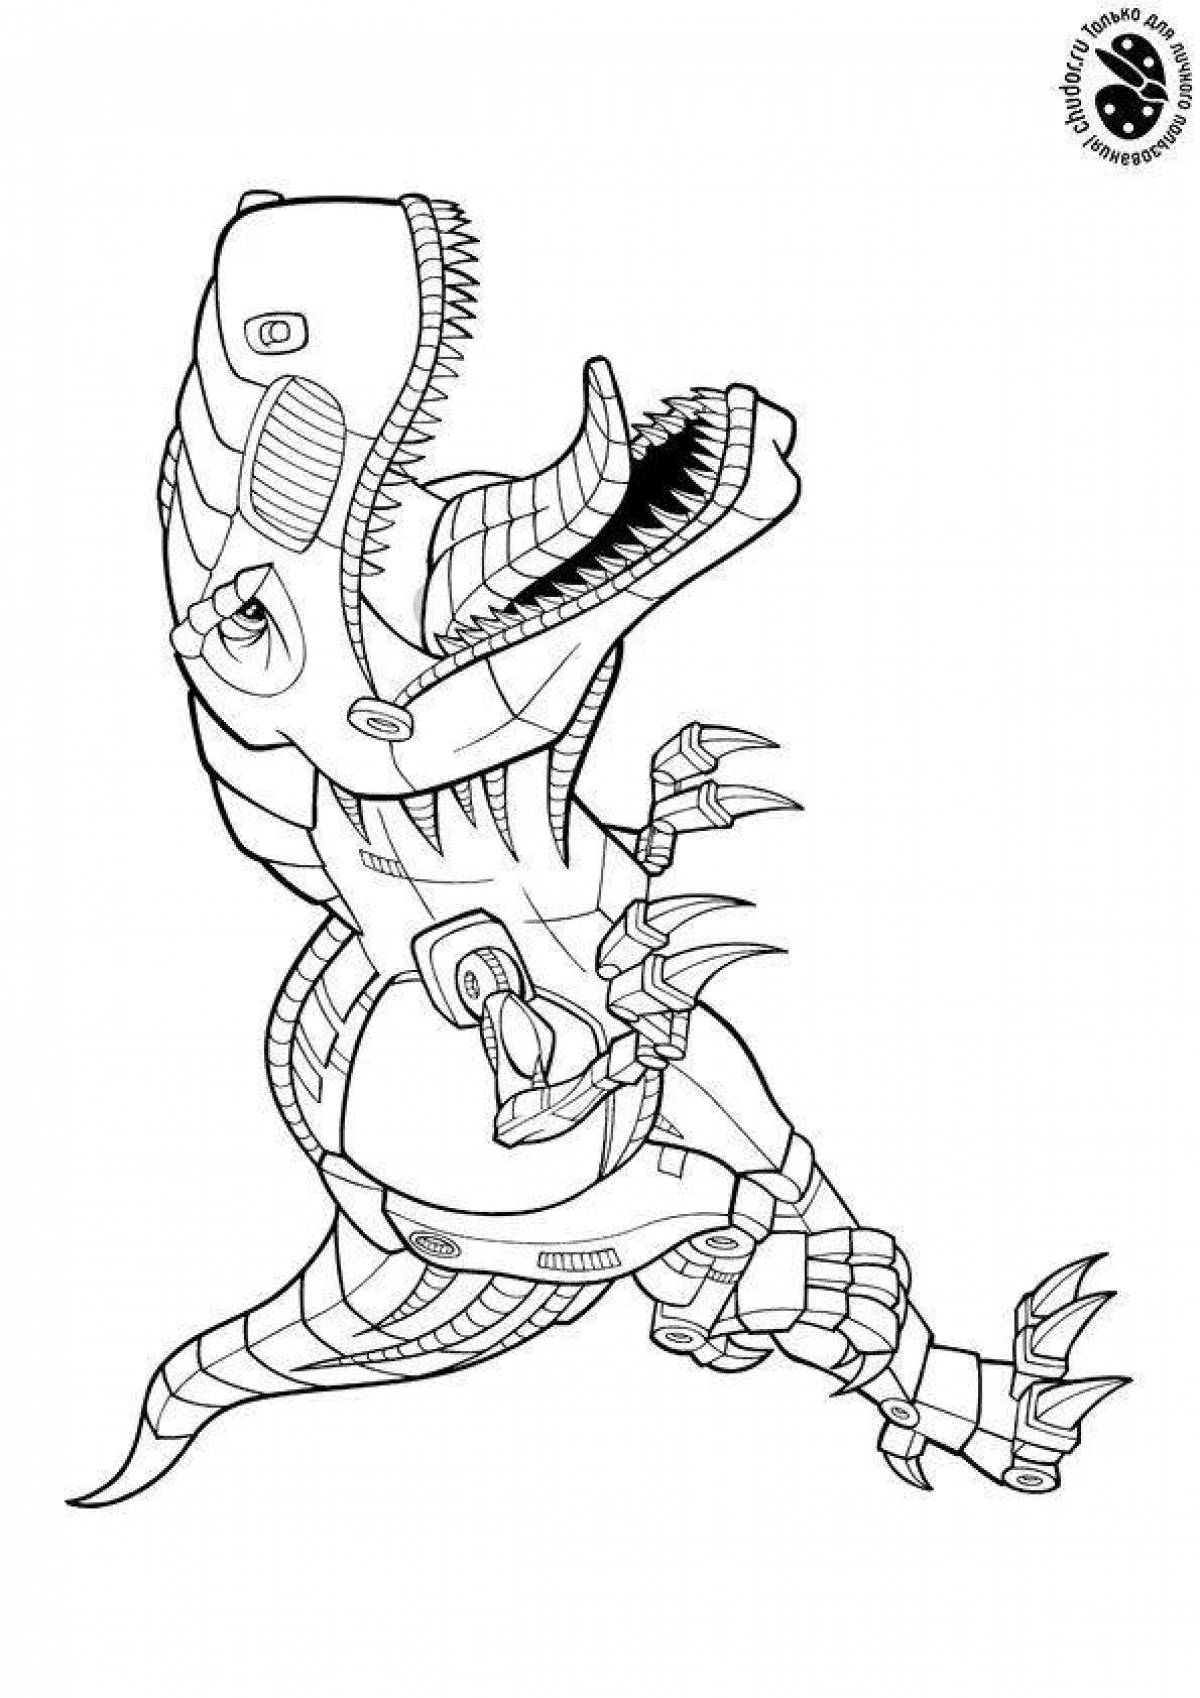 Coloring page awesome dinosaur robot